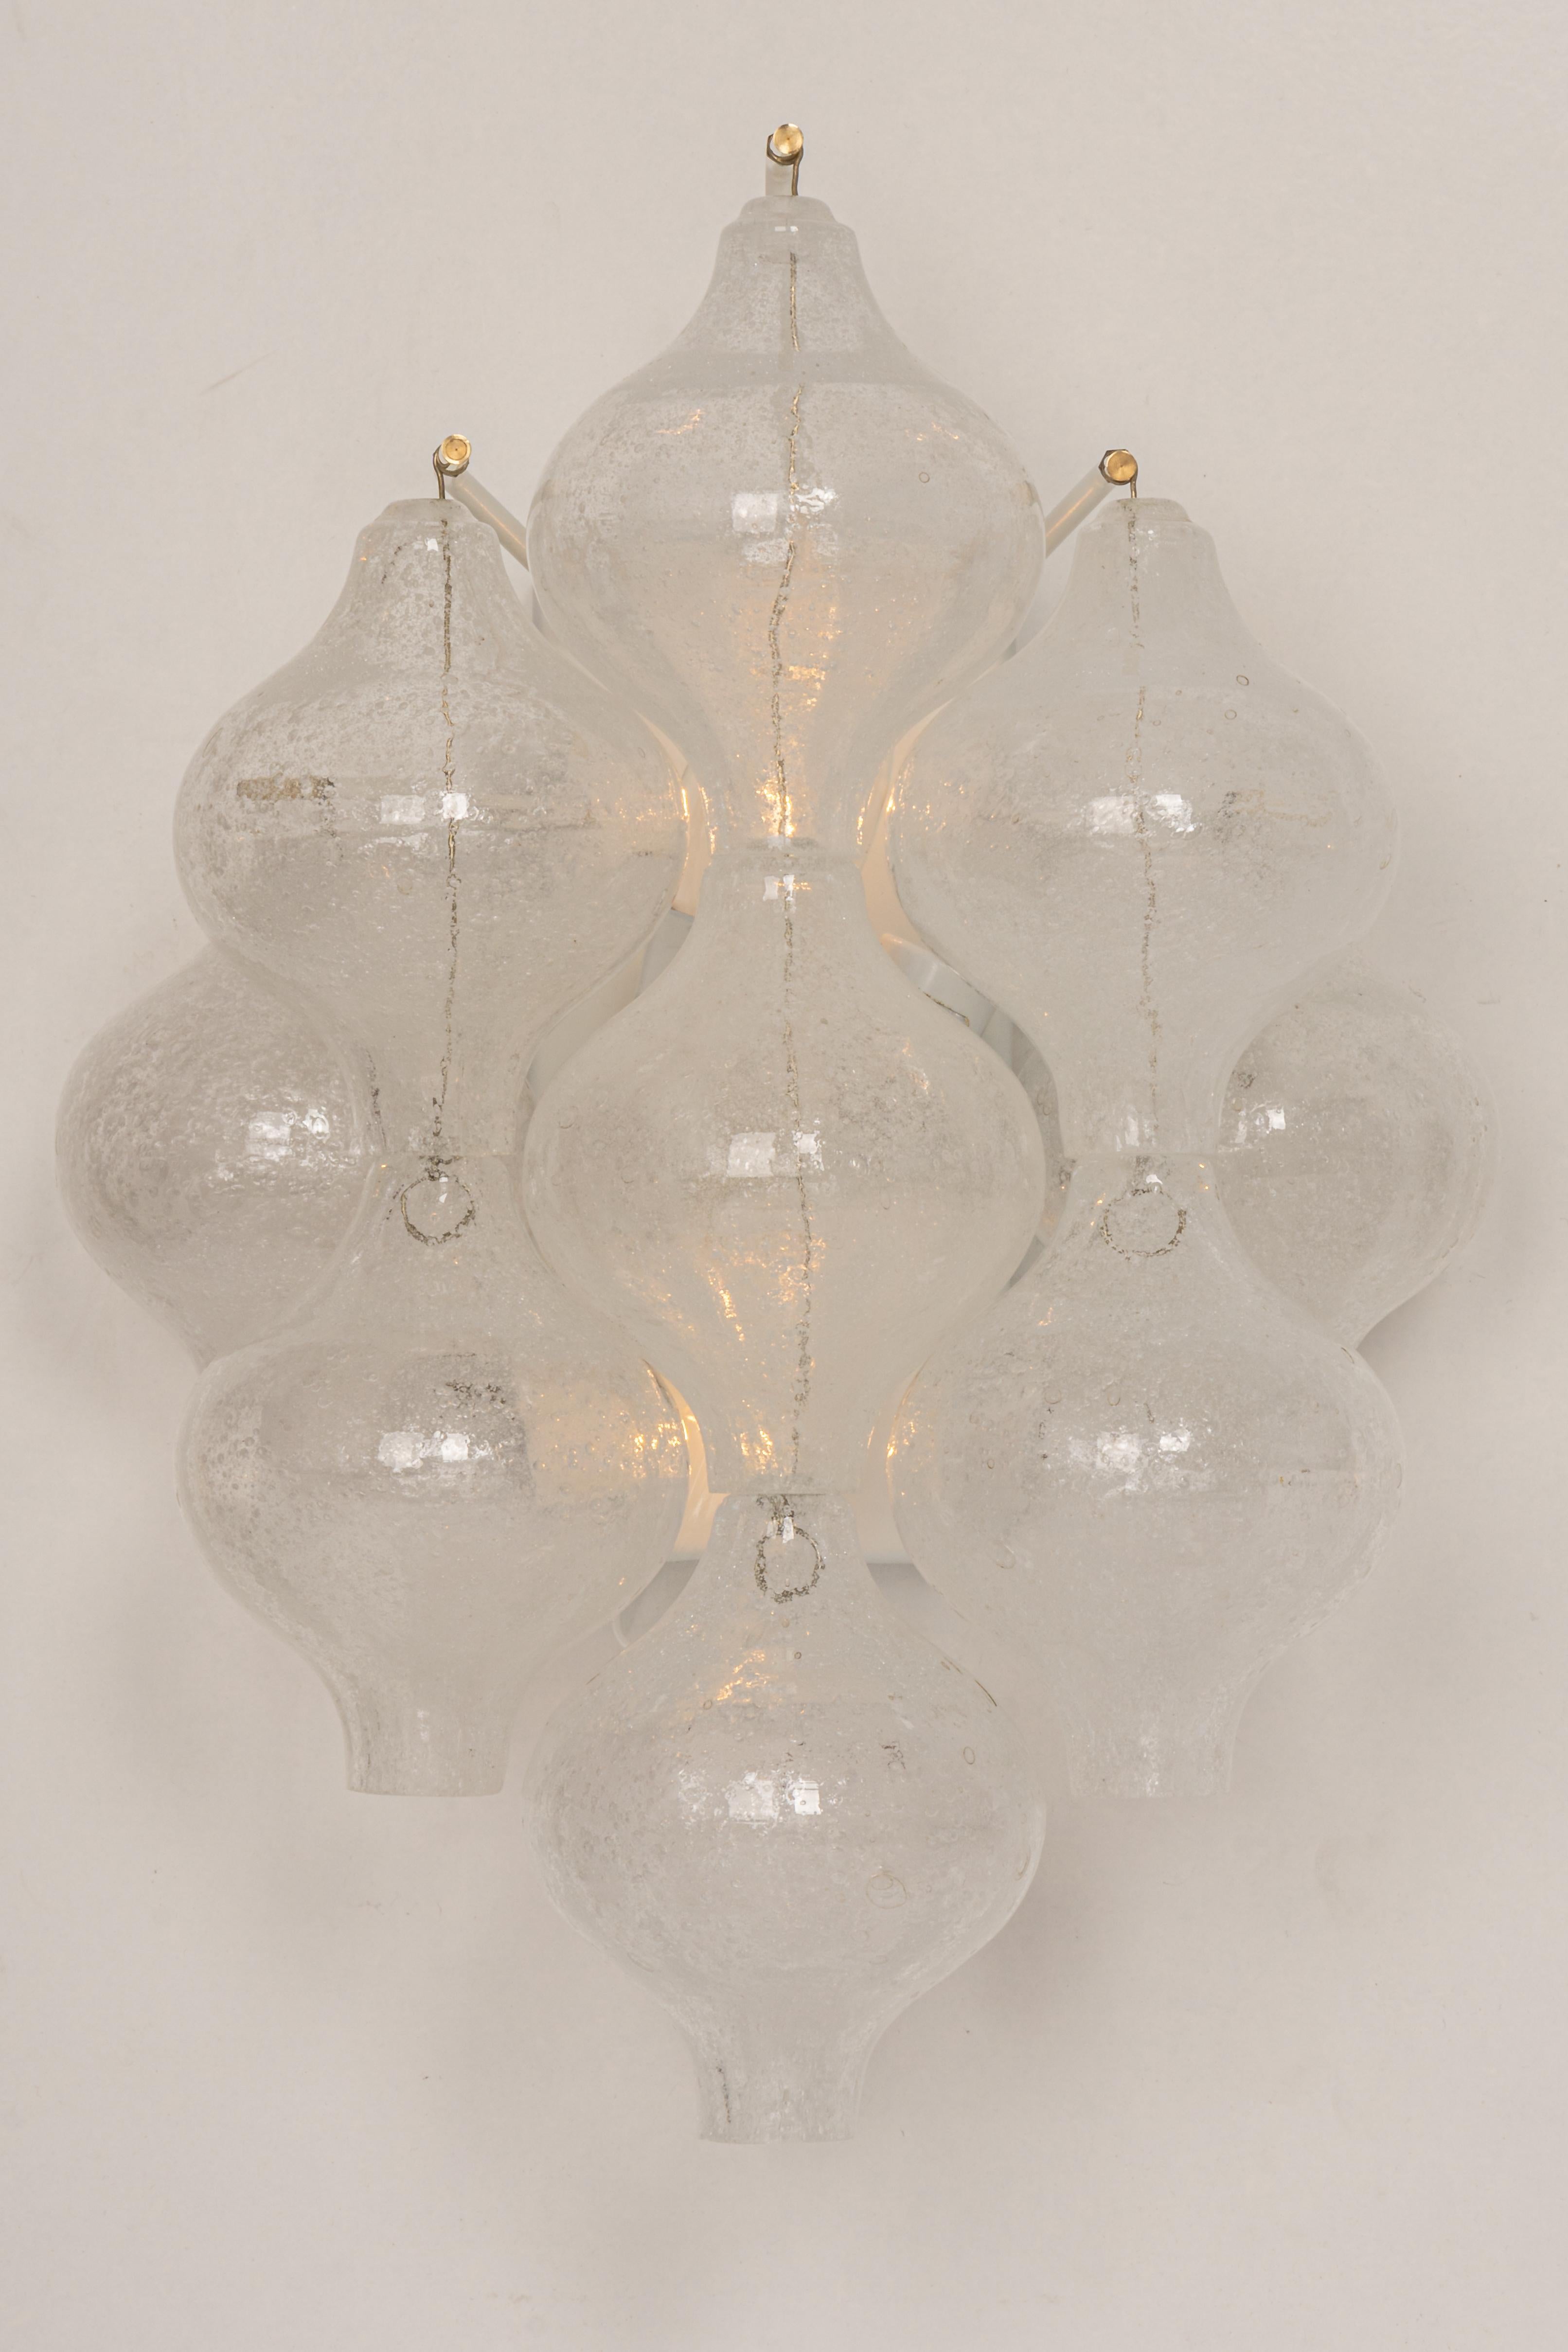 1 of 3 Pairs of Kalmar 'Tulipan' Sconces Wall Lights, Austria, 1970s For Sale 1